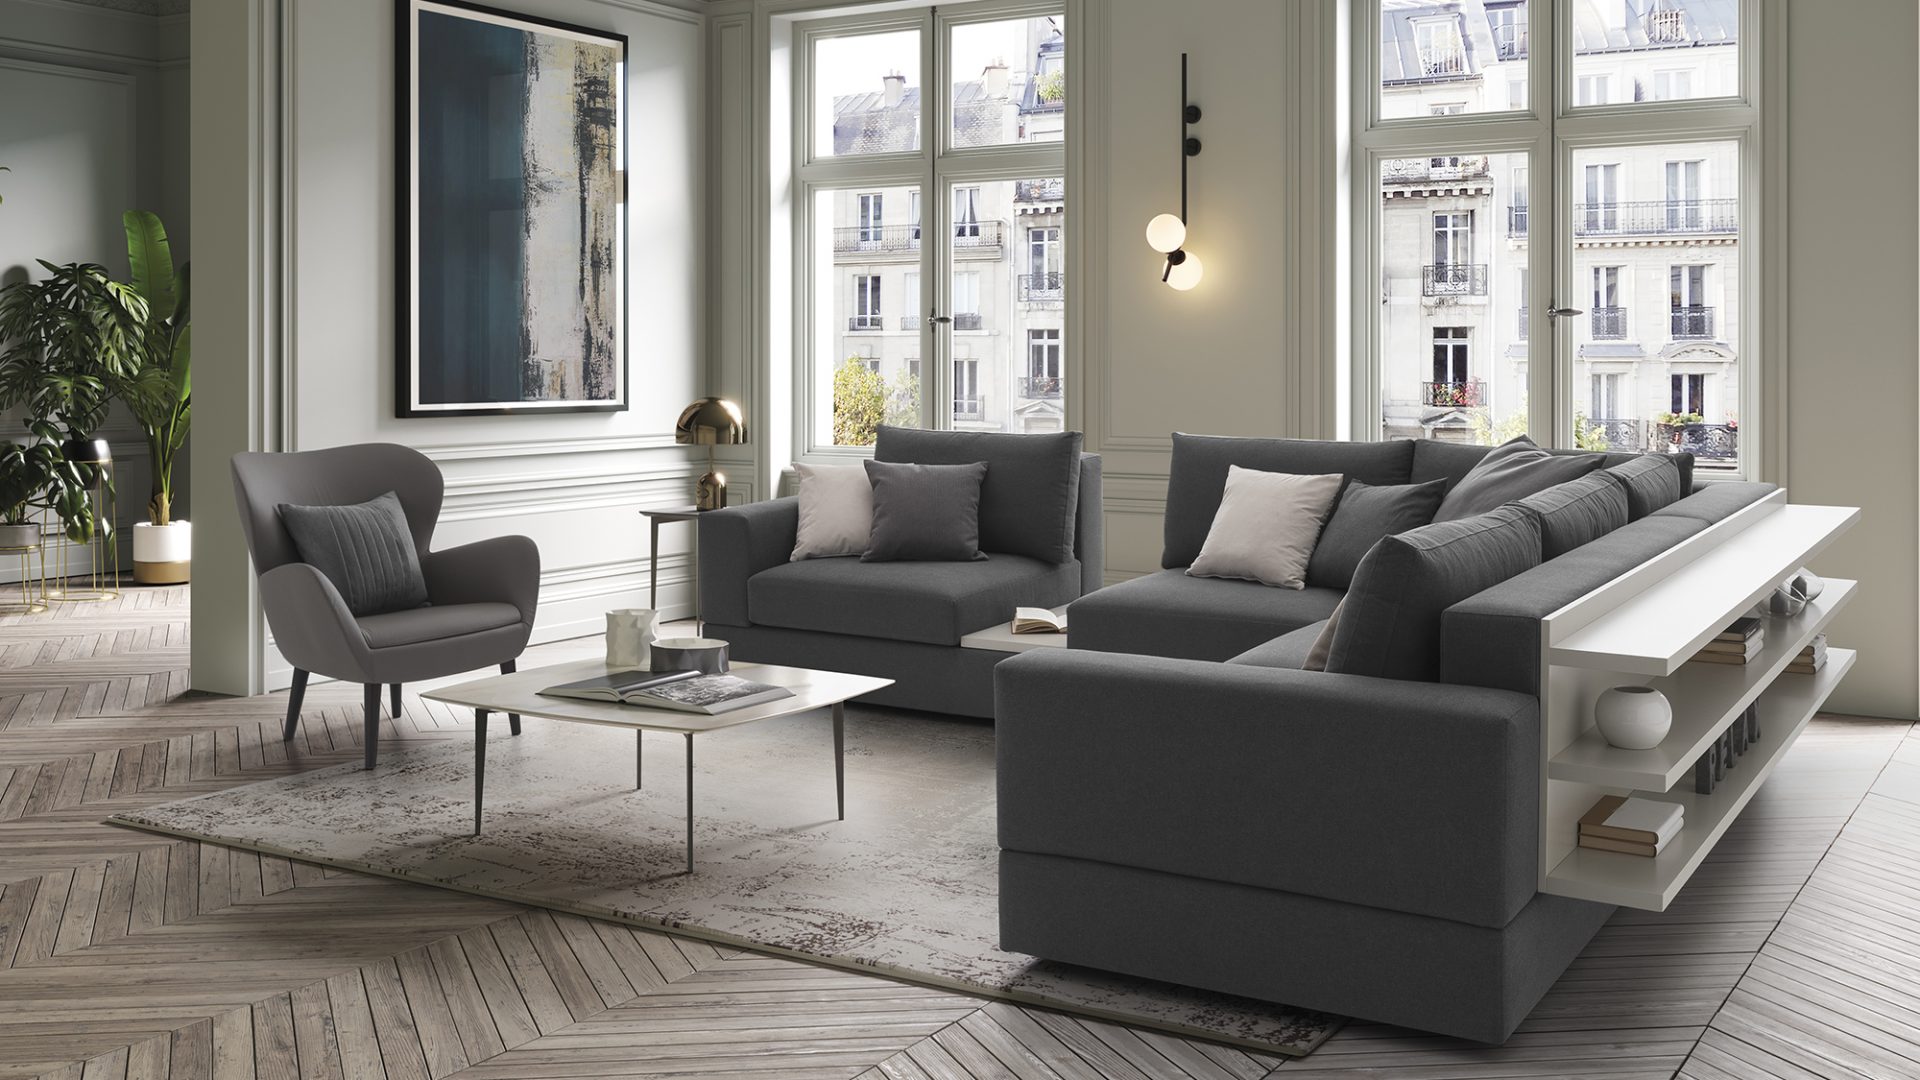 Sofa catalogue: in-depth study of the Abaco model - Confort Line